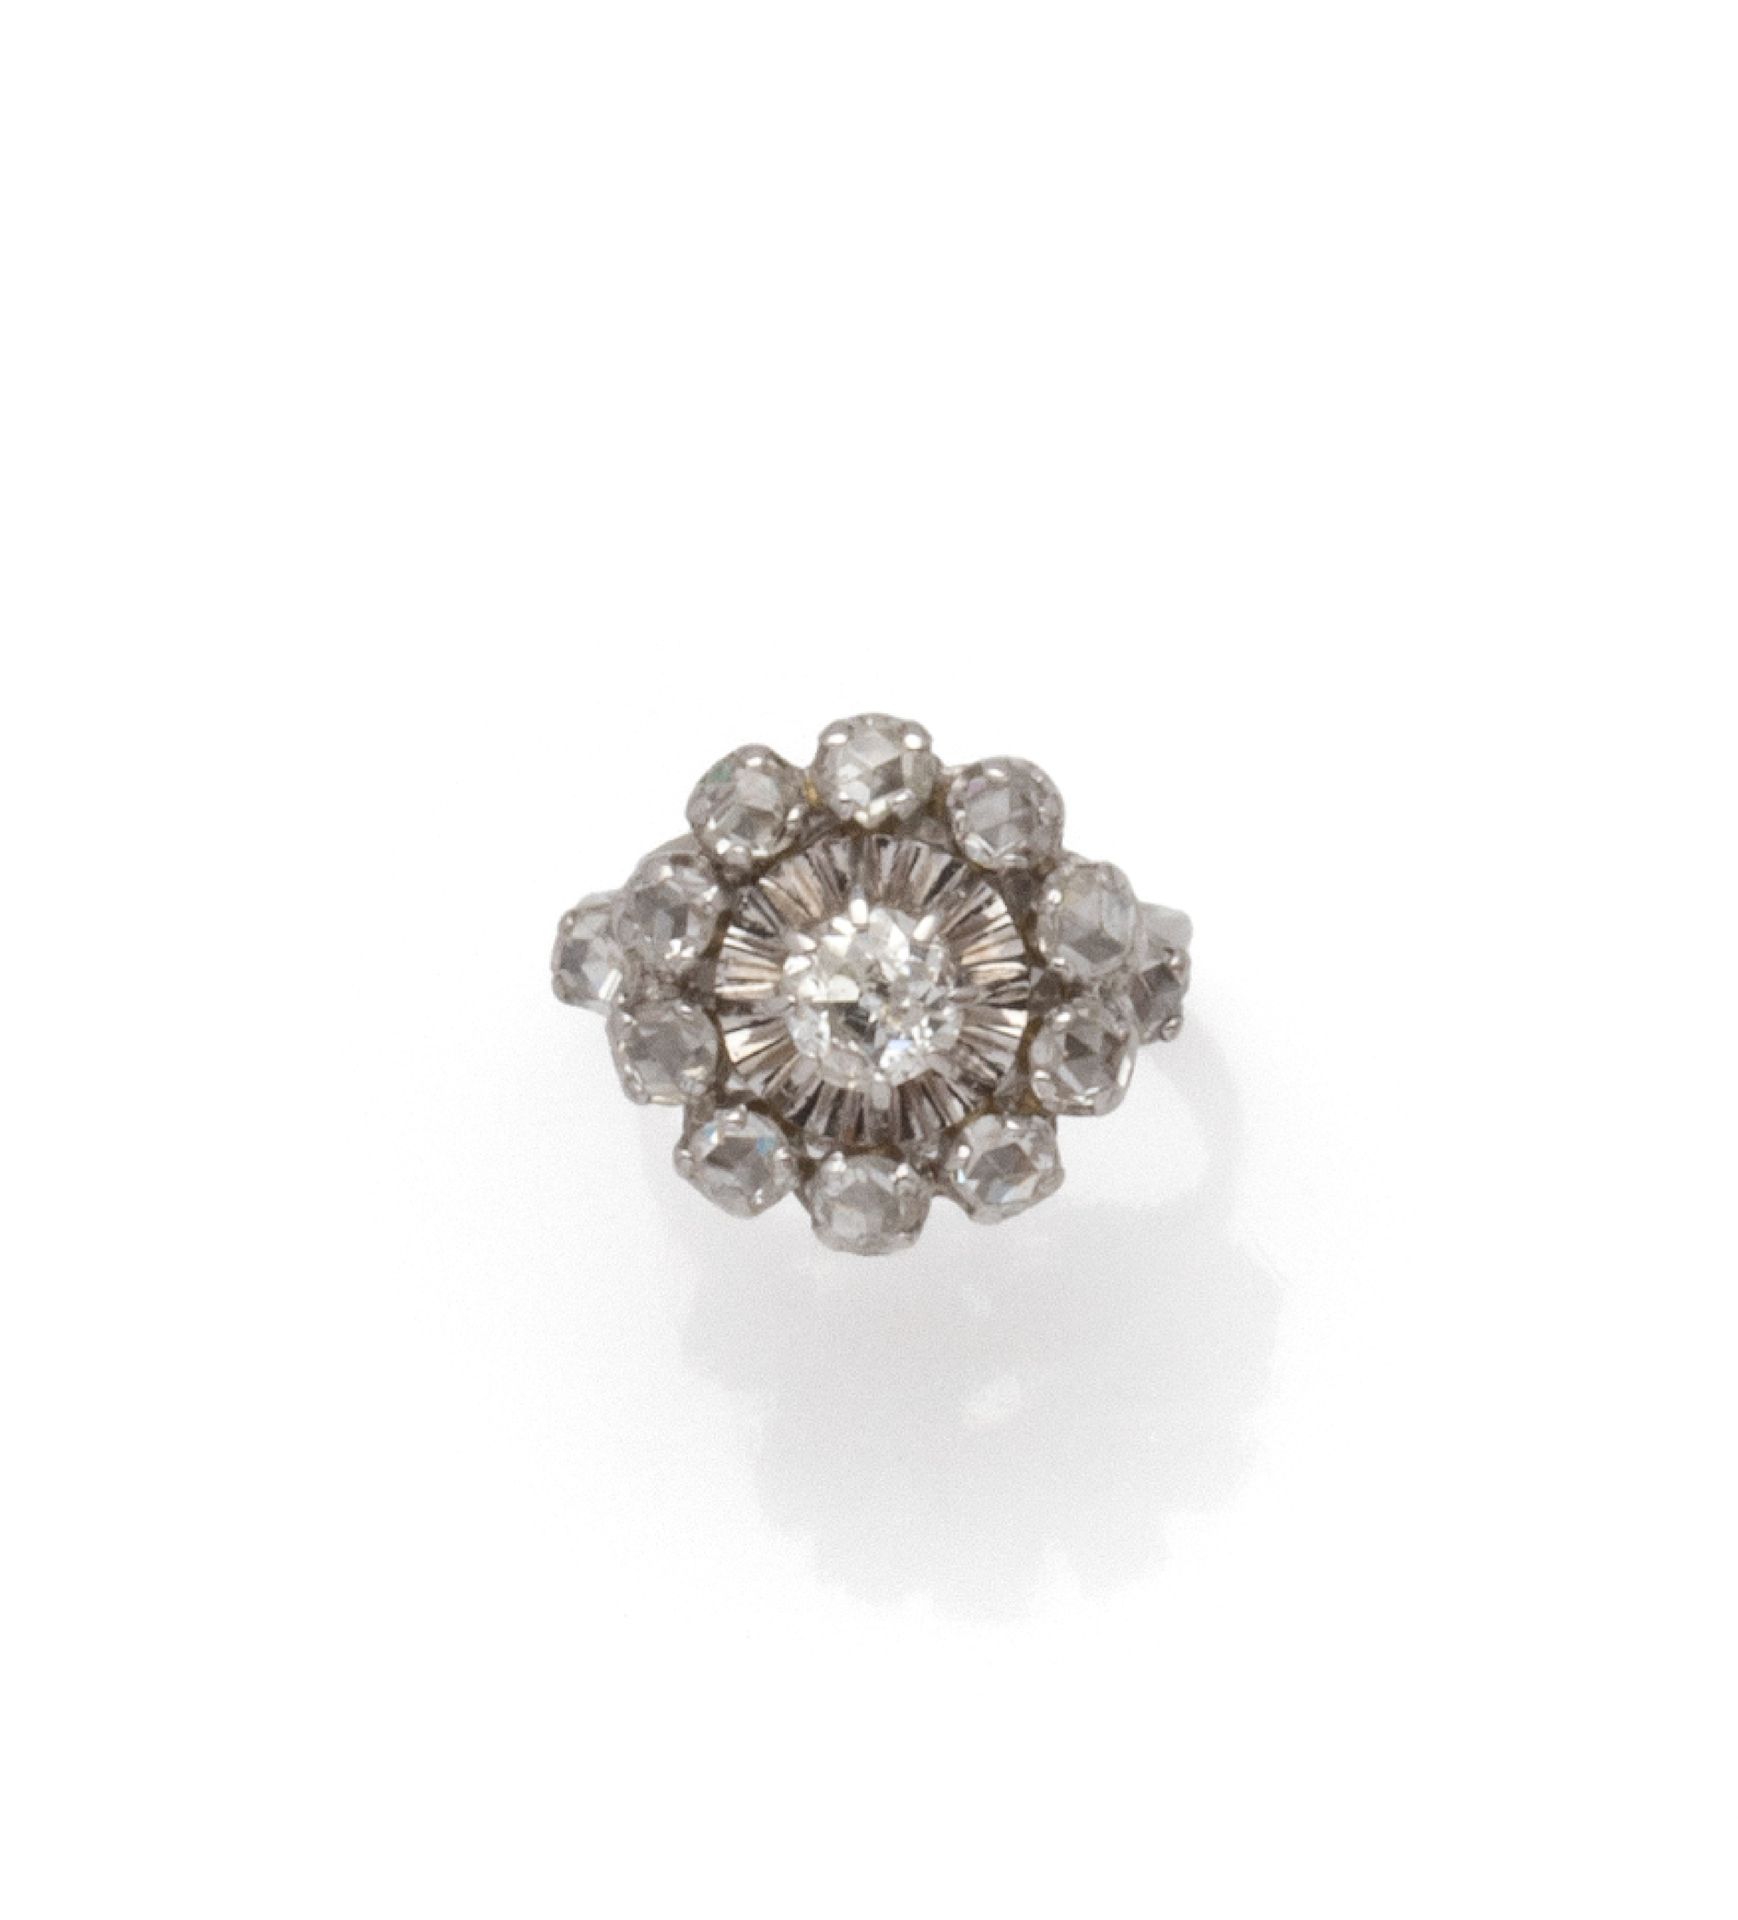 Null Daisy ring in 18K (750/1000) white gold, centered on an old mine cut diamon&hellip;